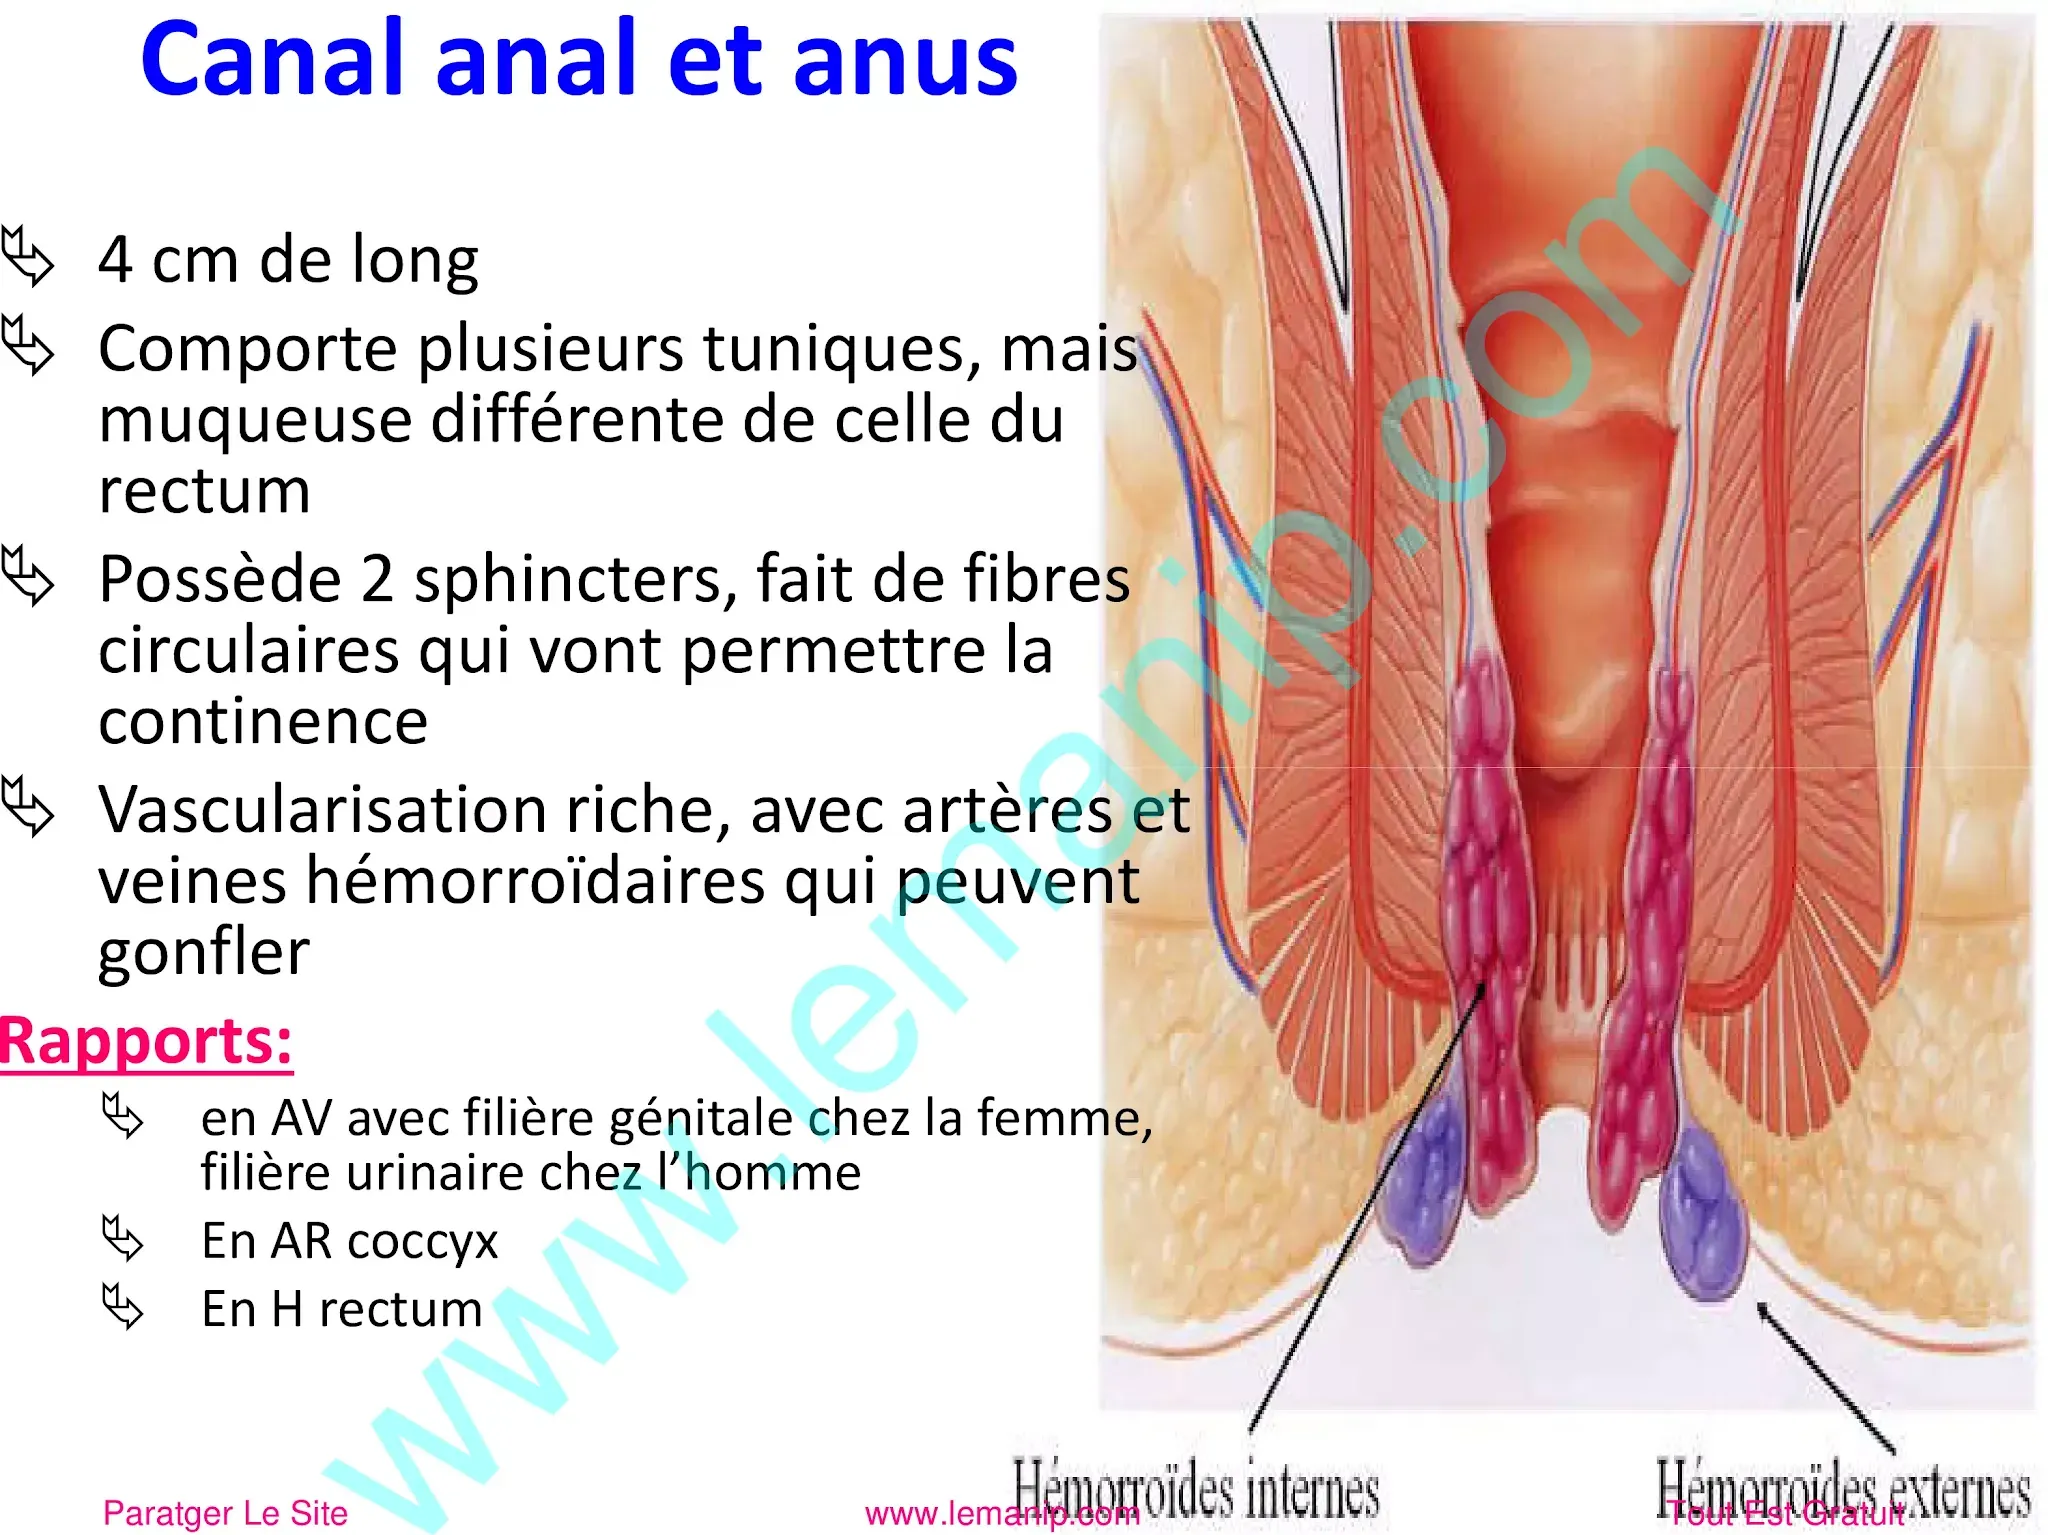 Canal anal et anus